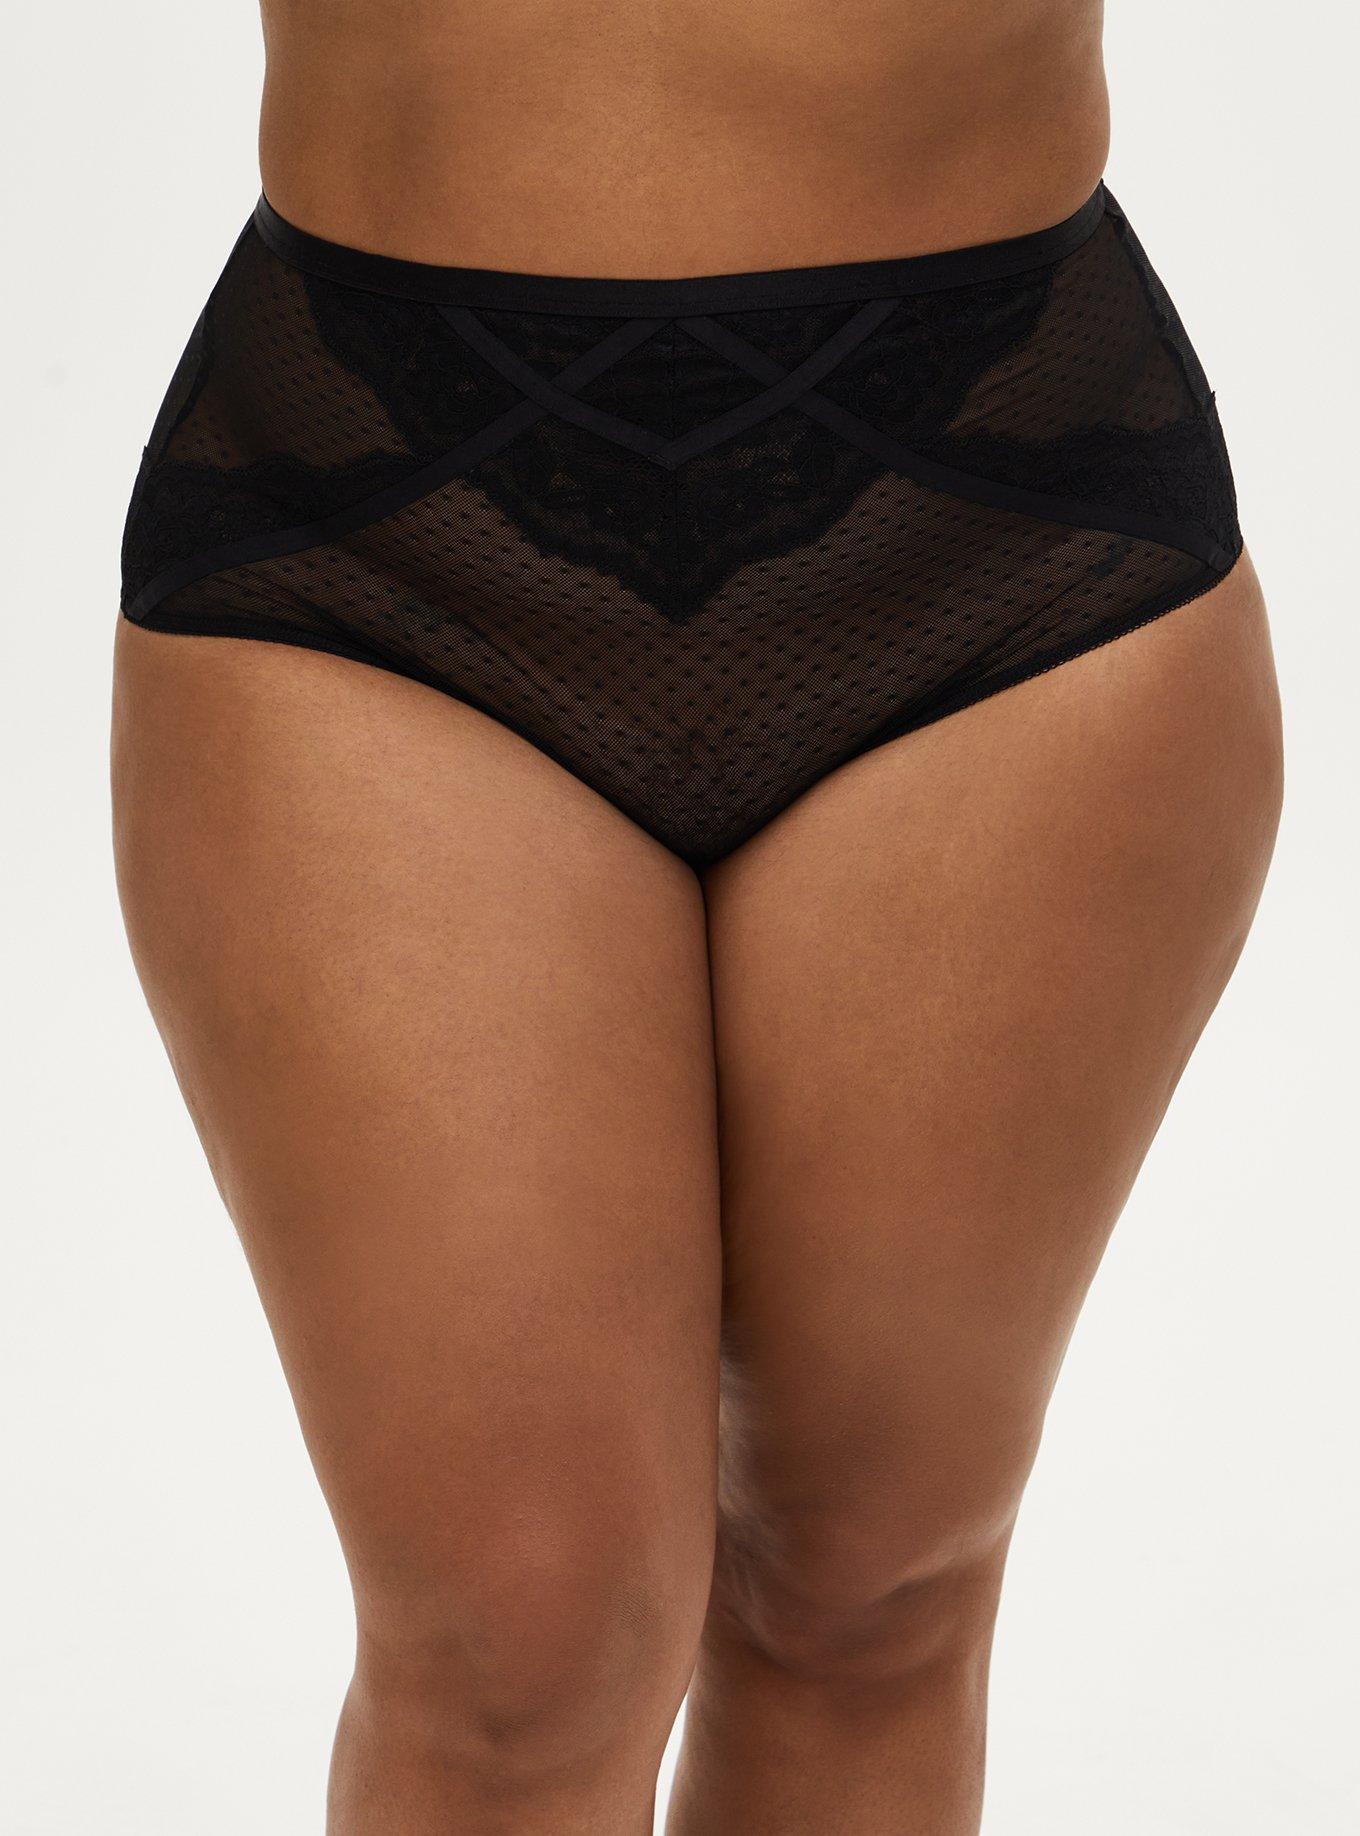 sexy BE WICKED lace MESH o-ring BRAZILIAN sheer CHEEKY panty PANTIES  underwear